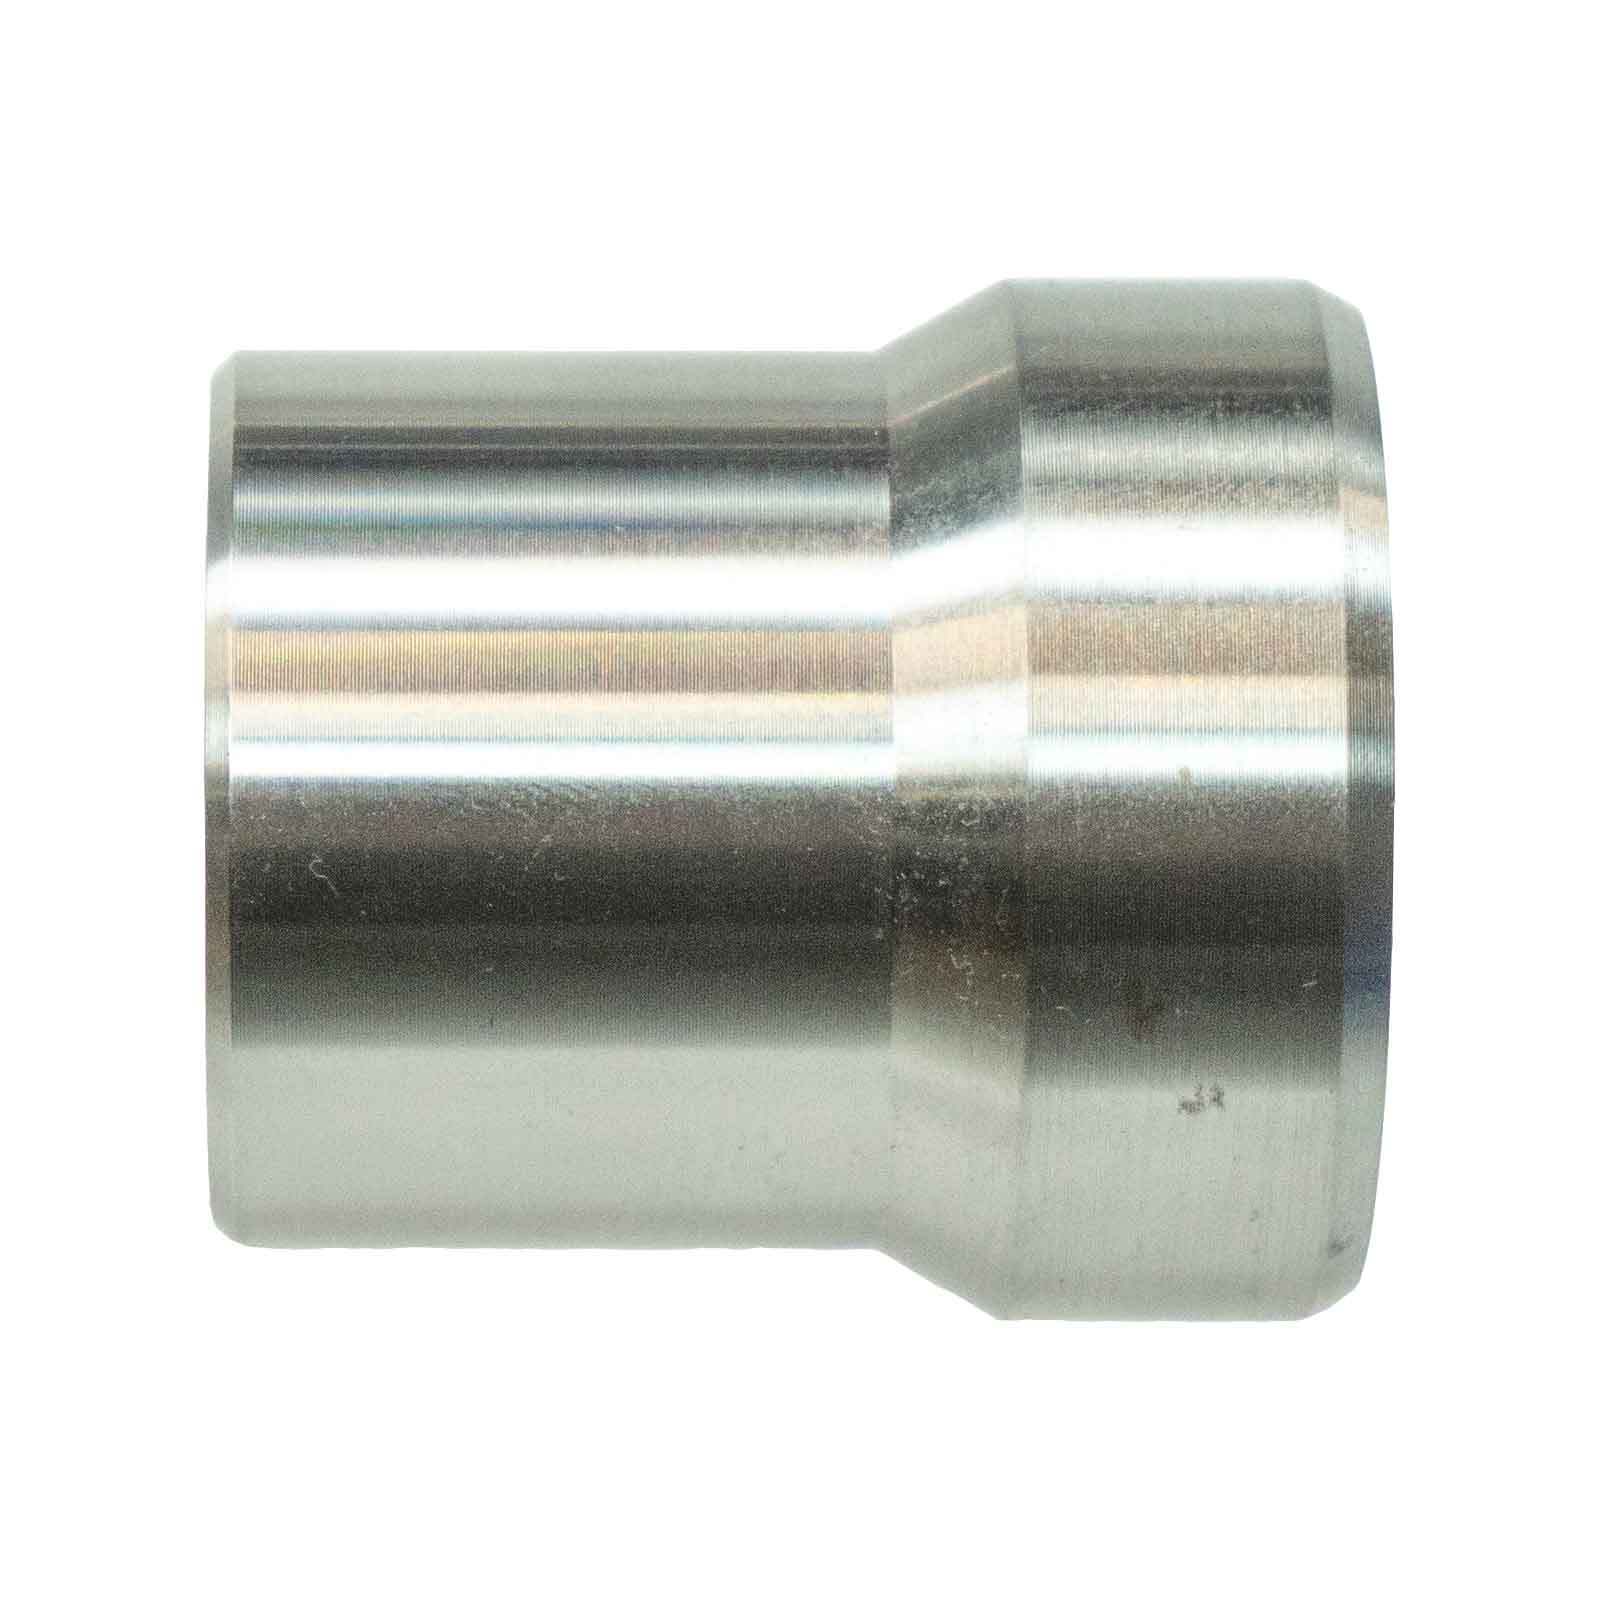 2 OD Hex Tube Insert Left Hand (Bung) for 1.25- 12 TPI Heim Joint Rod End